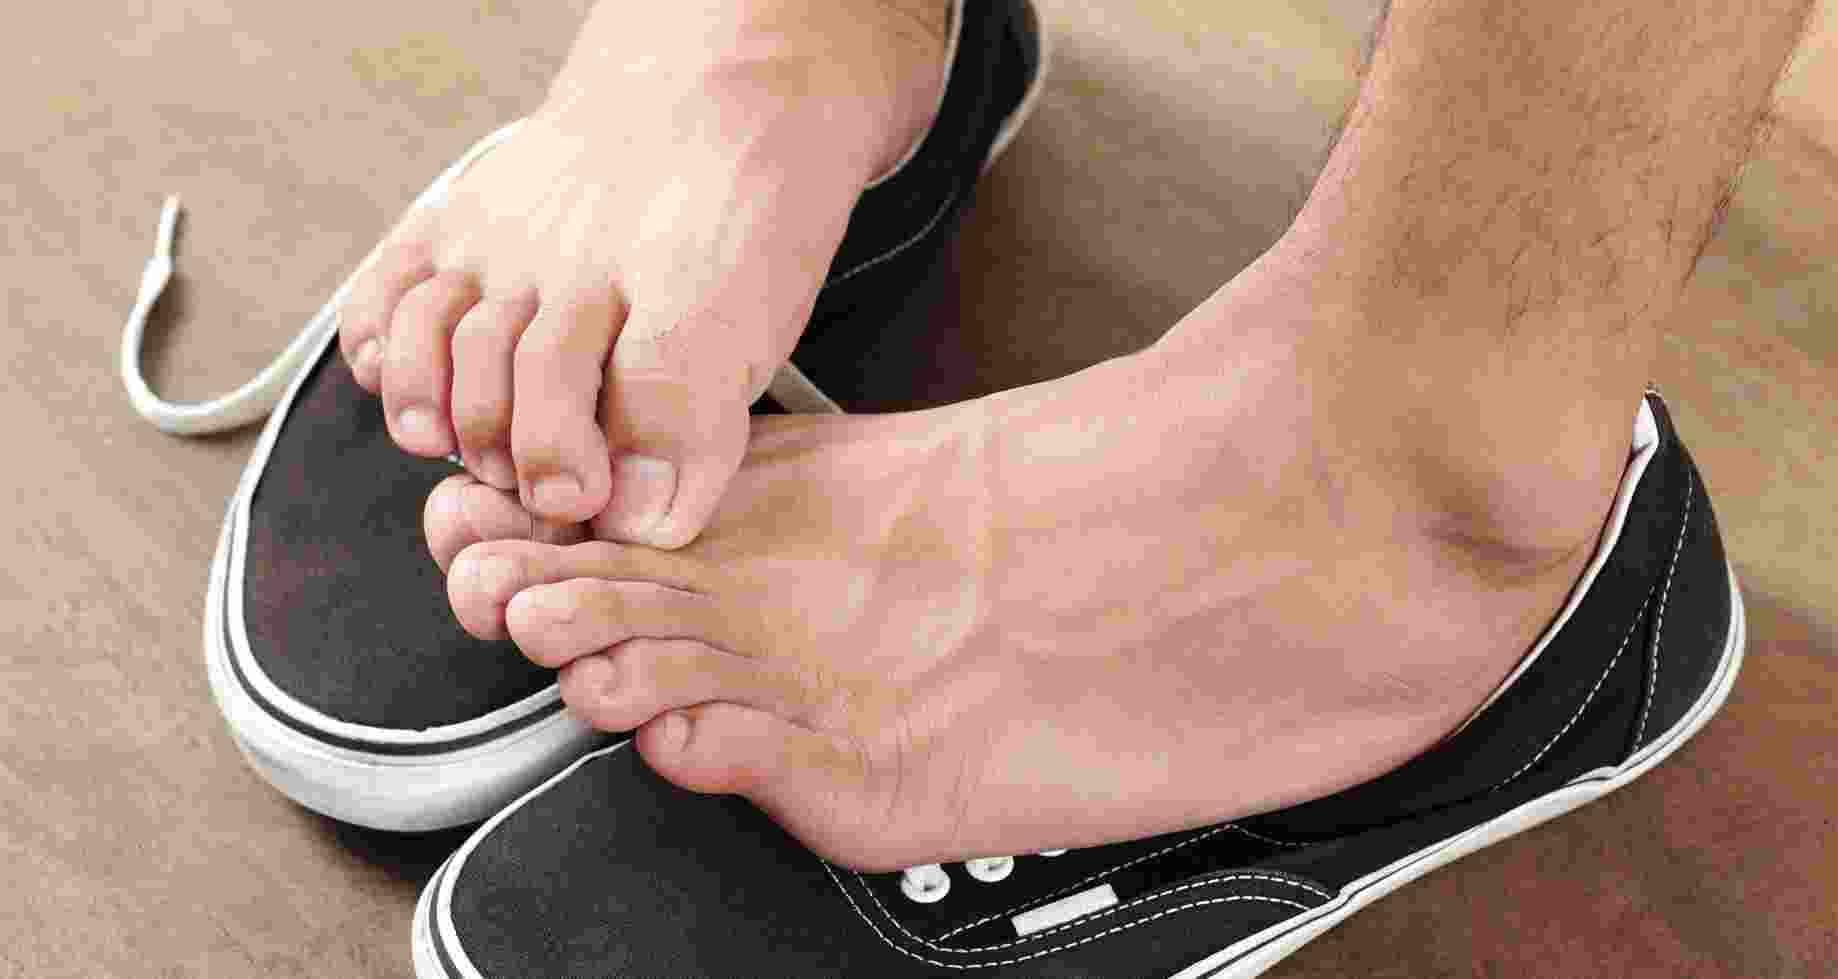 Itchy red spots on feet | Mumsnet